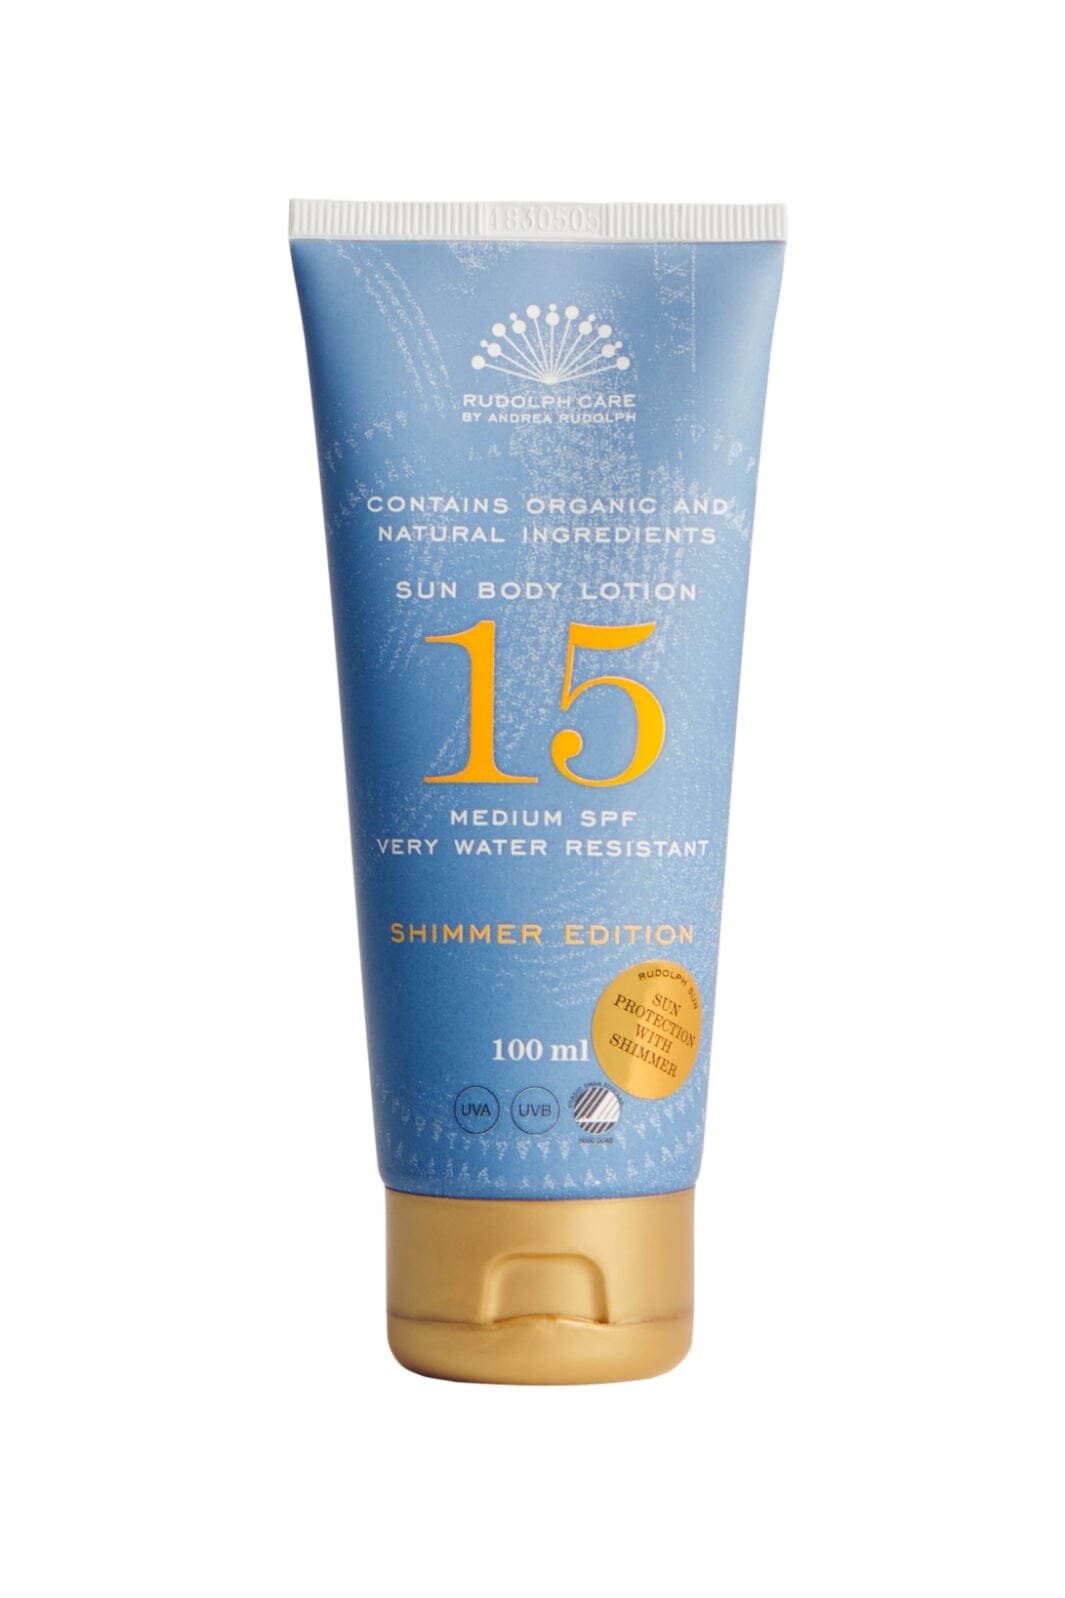 Rudolph Care - Sun Body Lotion Shimmer Edition SPF 15 Creme 